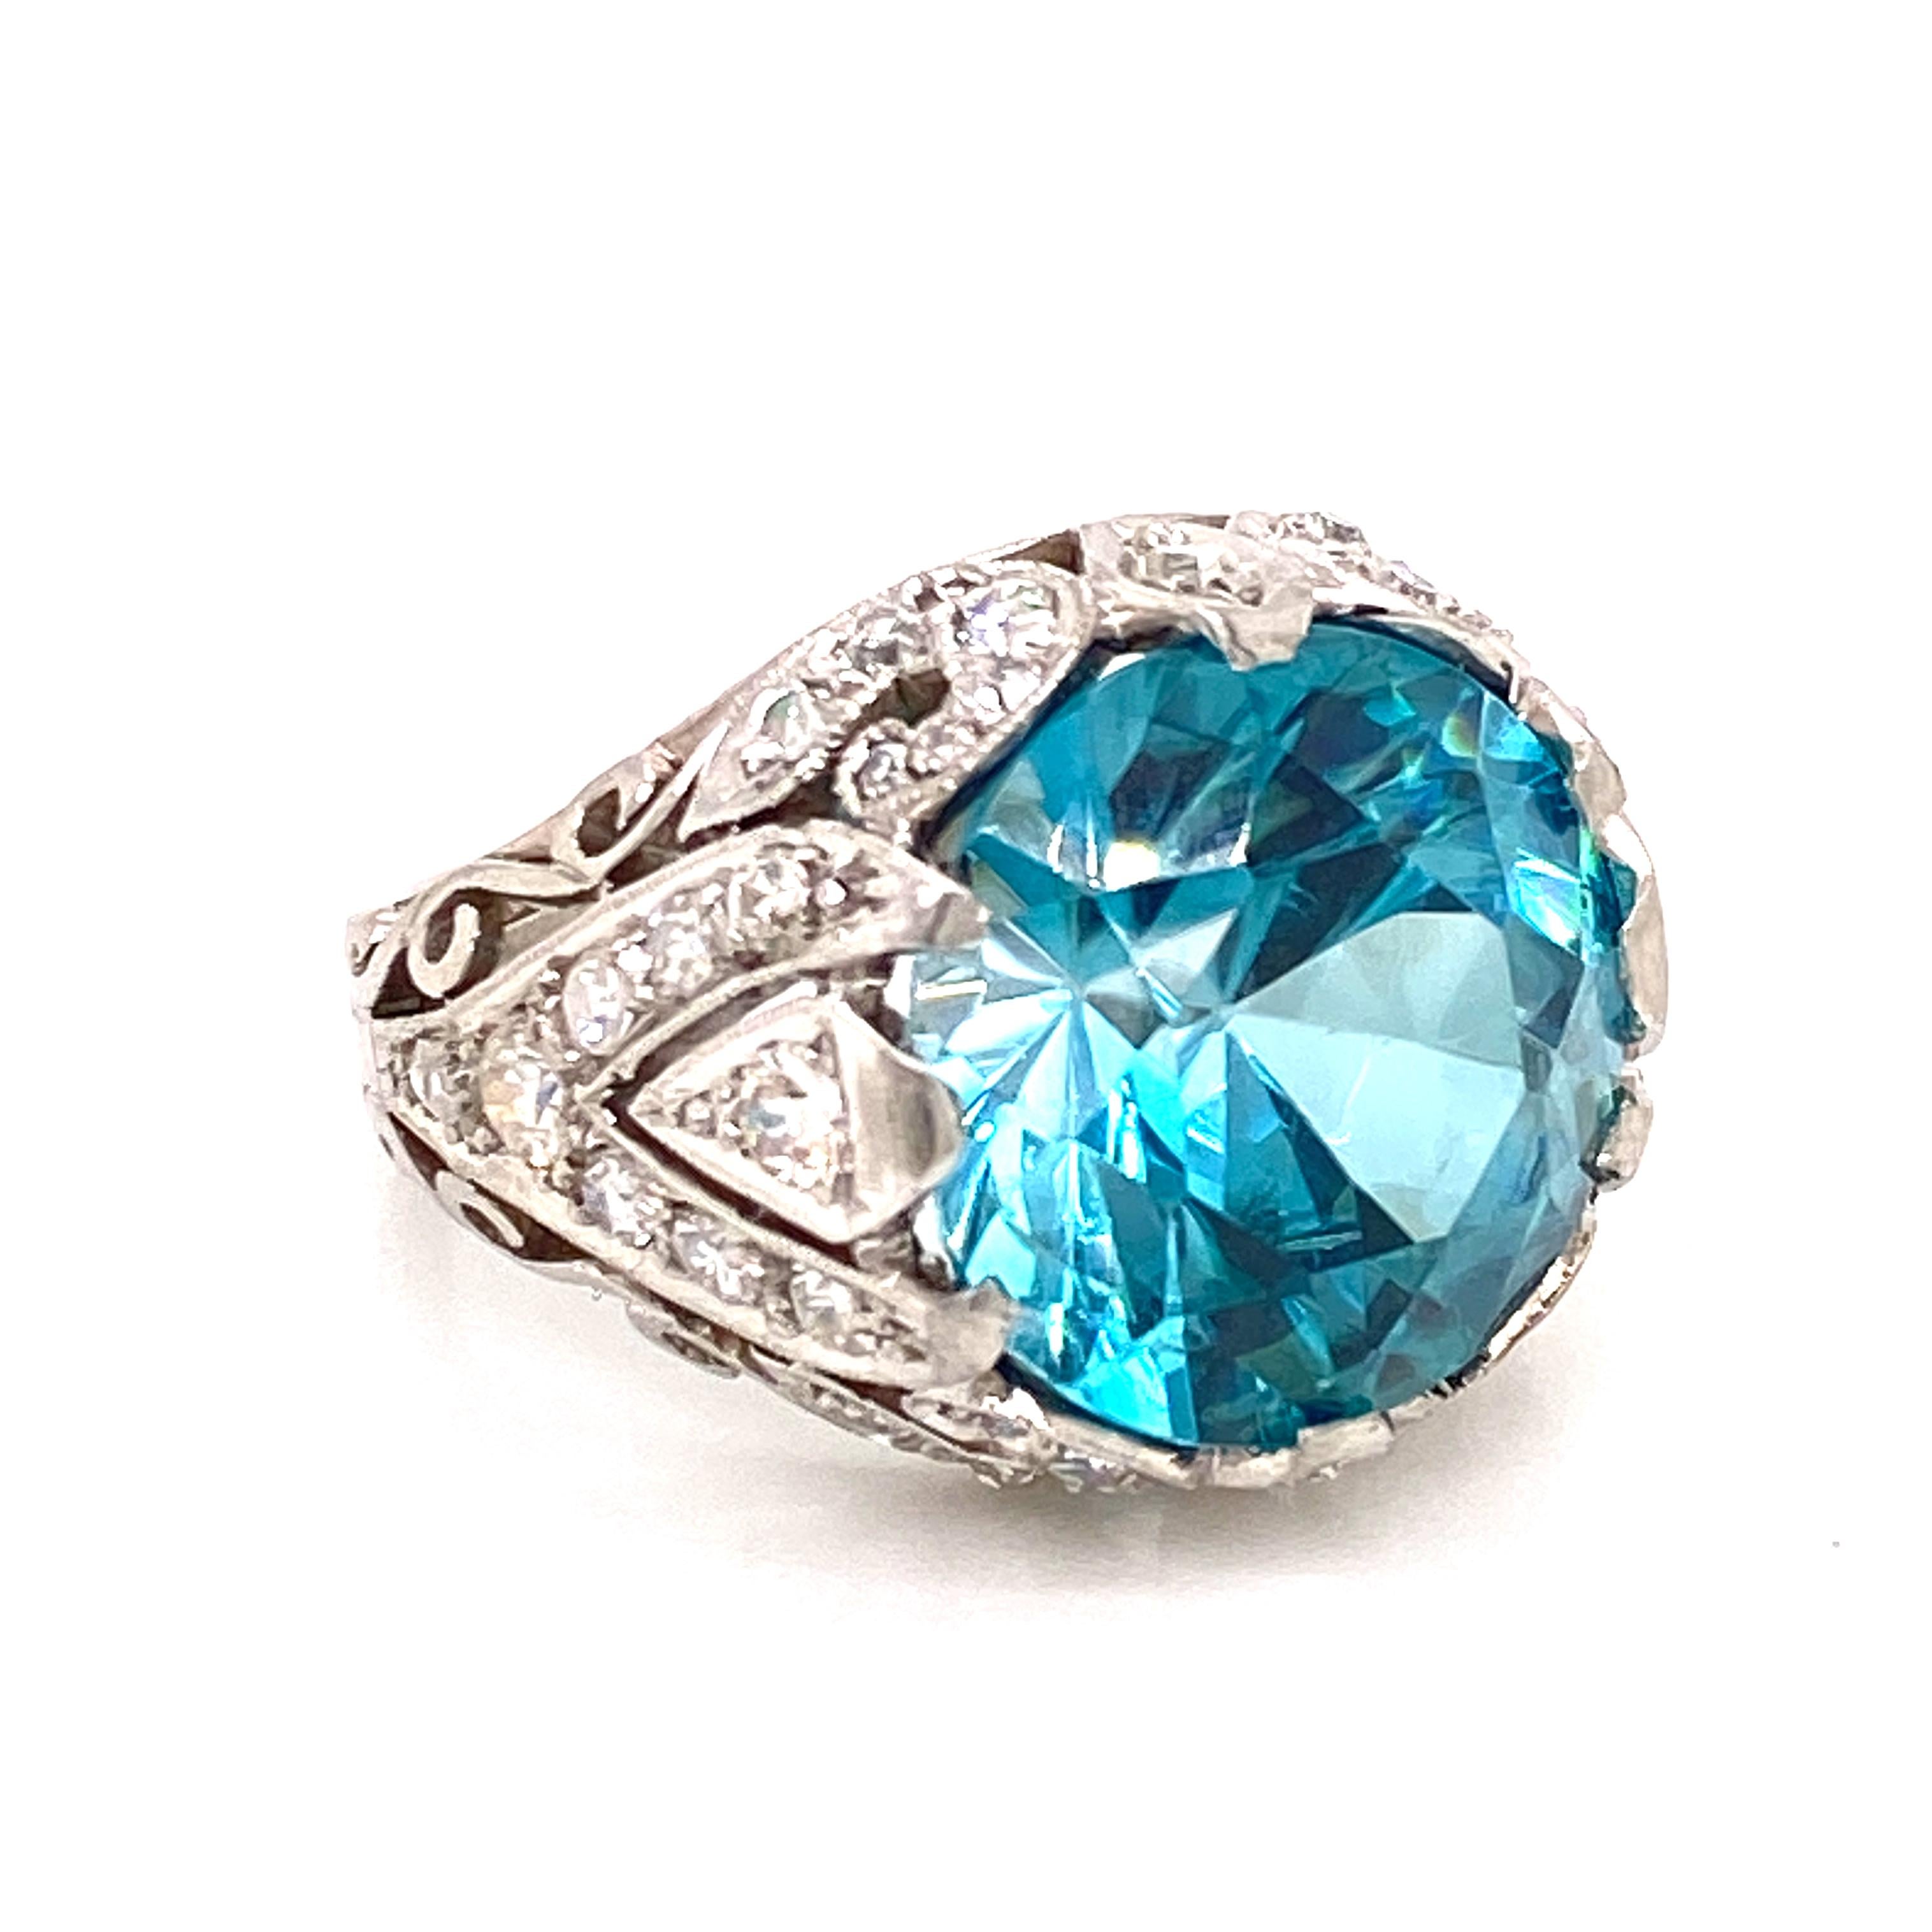 Gorgeous Natural Blue Zircon gemstone set in a hand crafted diamond mounting. The 11.74 carat round blue zircon has not had any heat or color treatment. AGL certificate included. The zircon measures 13.4 x13.2mm, and is set in a beautiful handmade